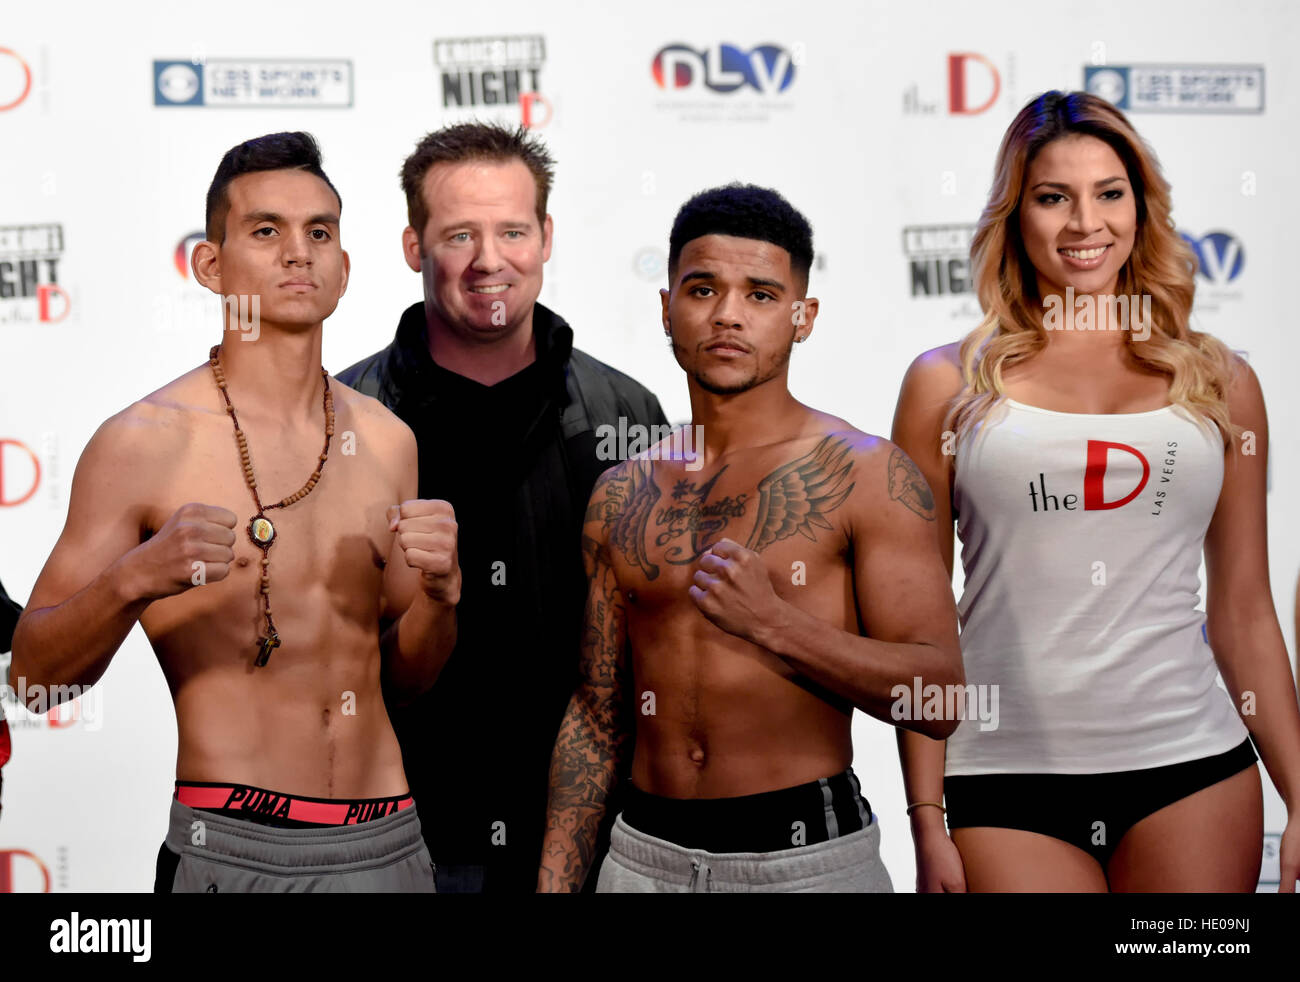 Las Vegas, Nevada December 16, 2016 - Fighters Randy 'El Matador' Moreno and Mike Fowler face off at the weigh-in for “Knockout Night at the D”  presented by the D Las Vegas and DLVEC and promoted by Roy Jones Jr. Boxing. Credit: Ken Howard/Alamy Live News Stock Photo